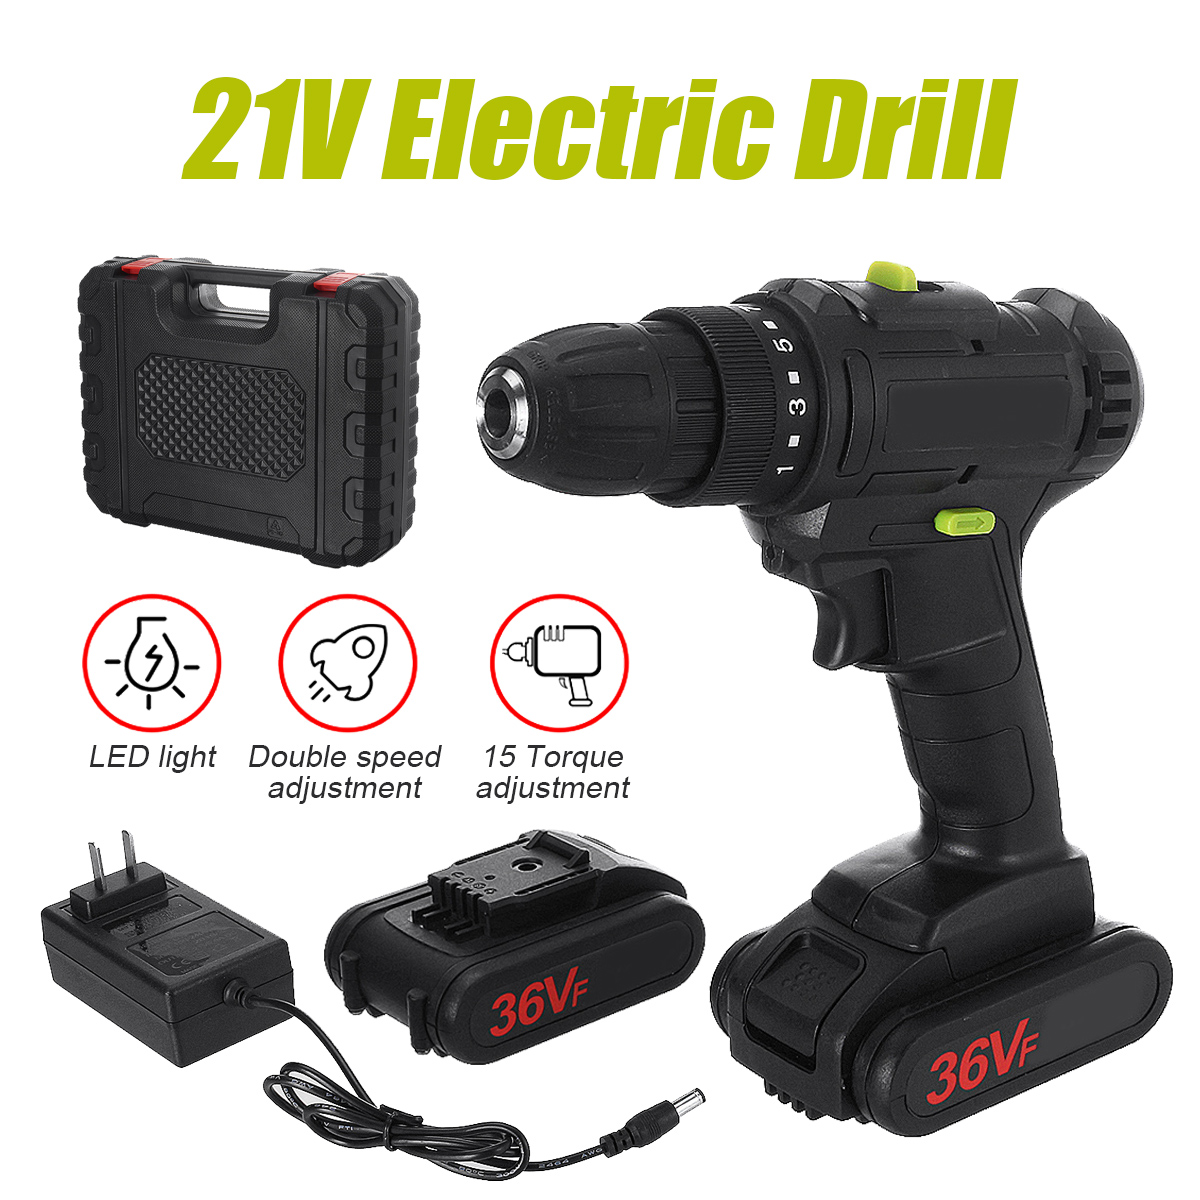 21V-1500mAH-LED-Light-Electric-Drill-Driver-Cordless-Rechargeable-Hand-Drills-2-Speed-Home-DIY-1574103-1